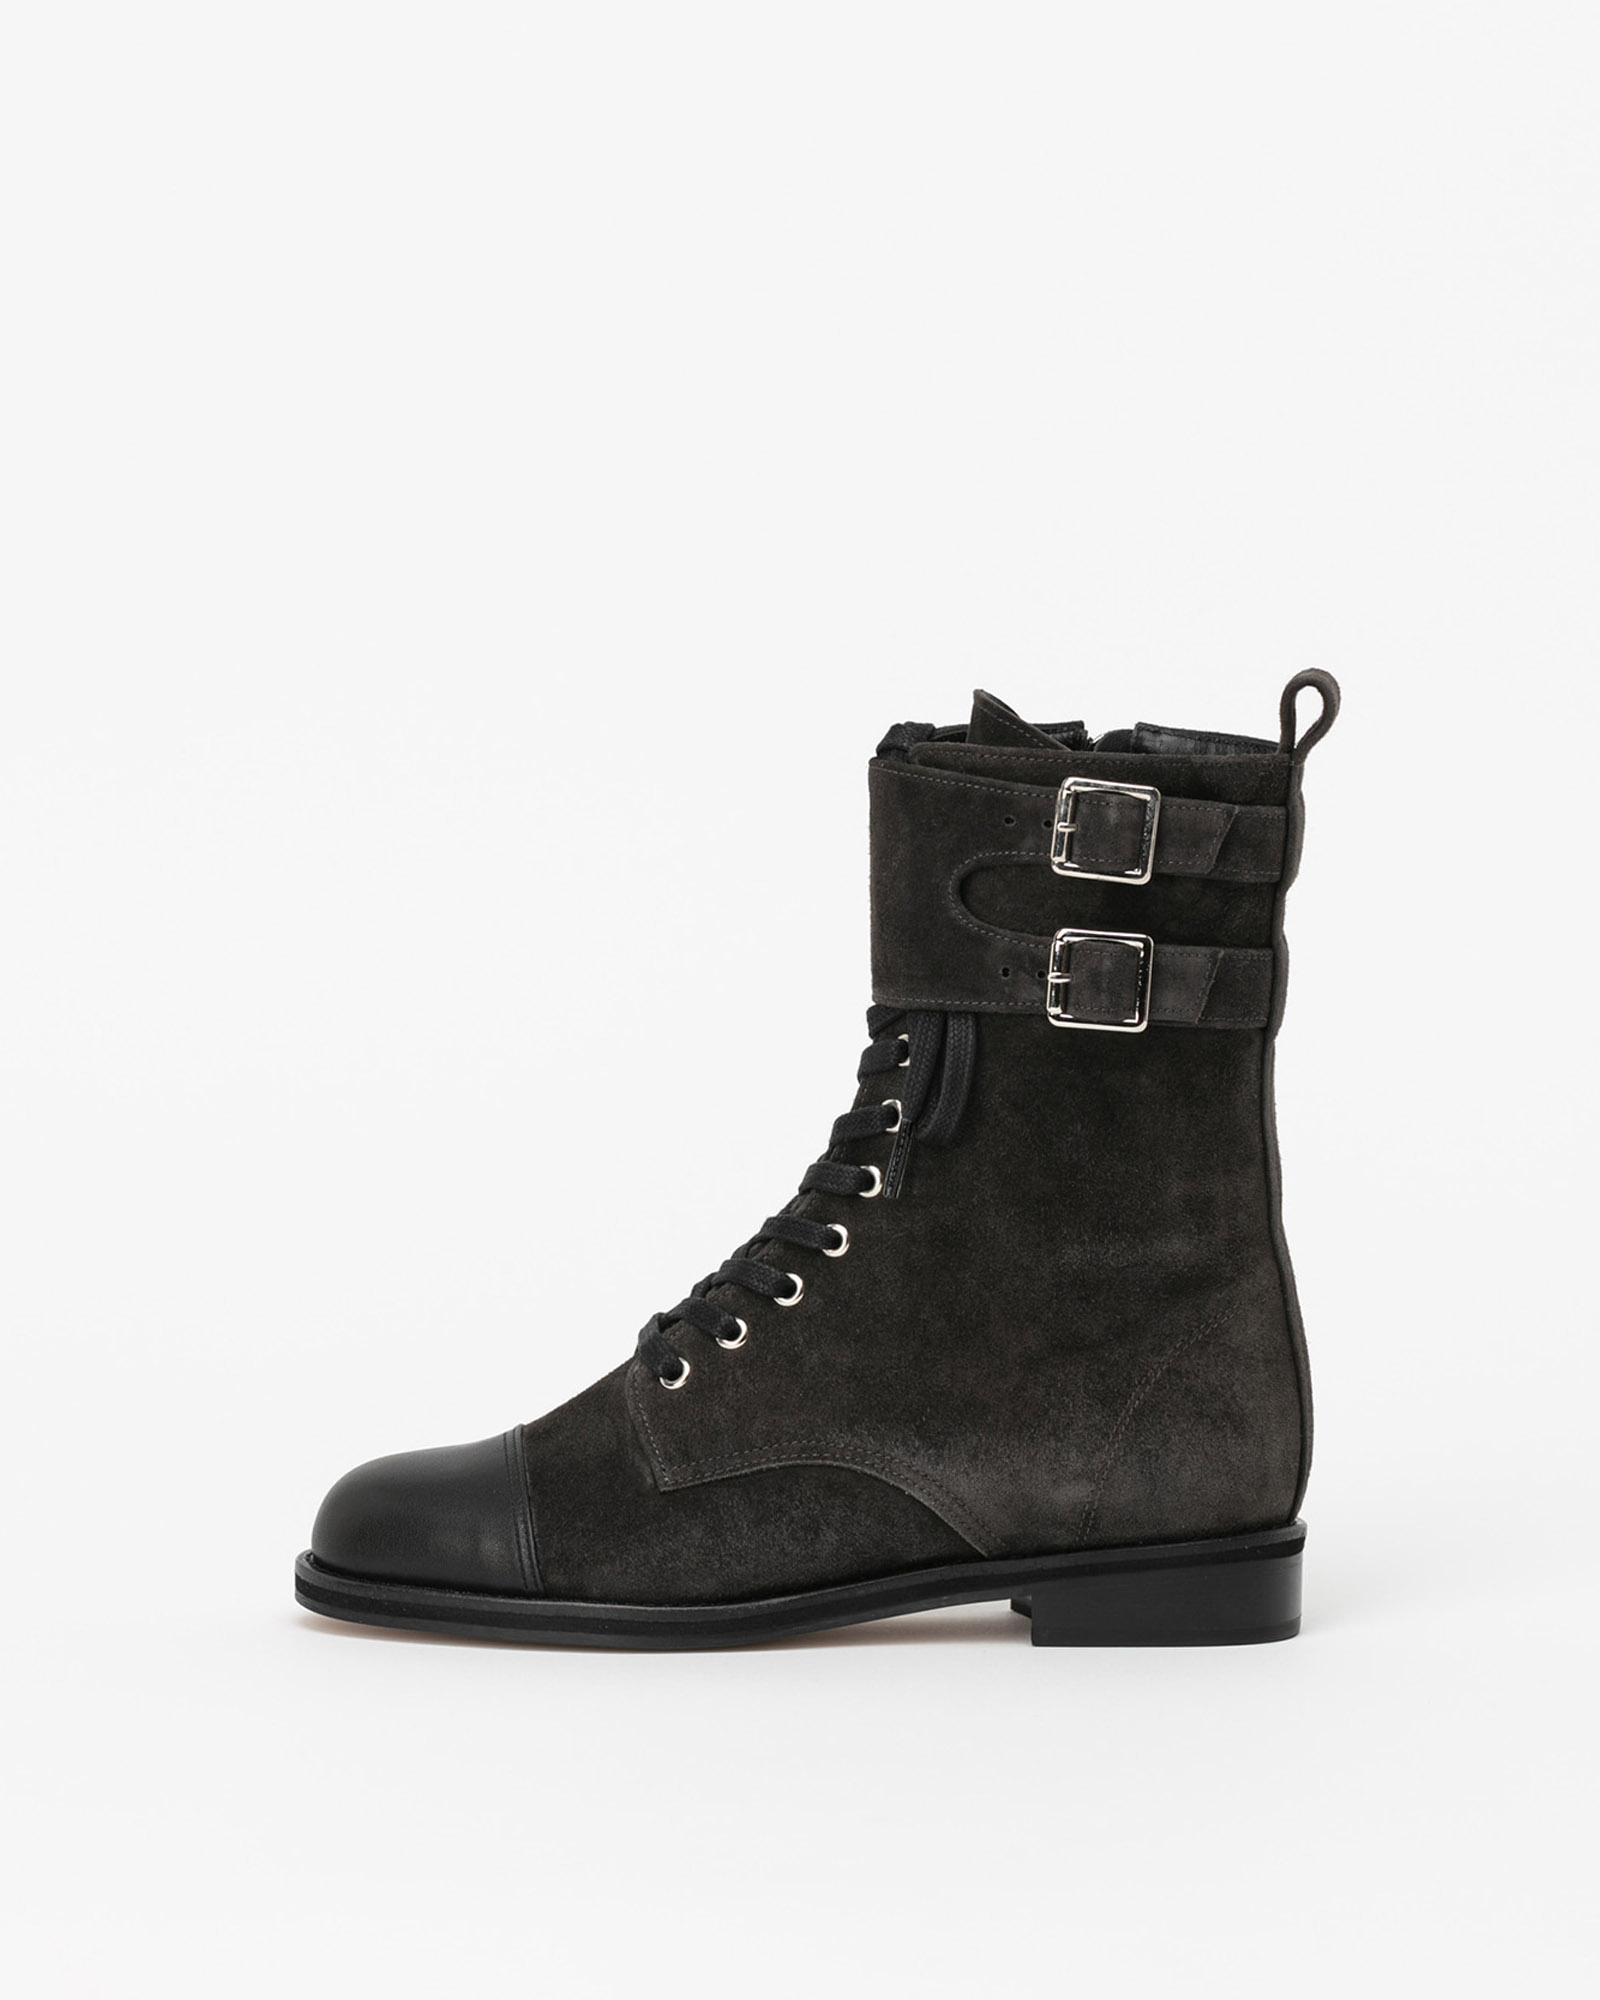 Duma Combat Boots in Charcoal Grey Suede